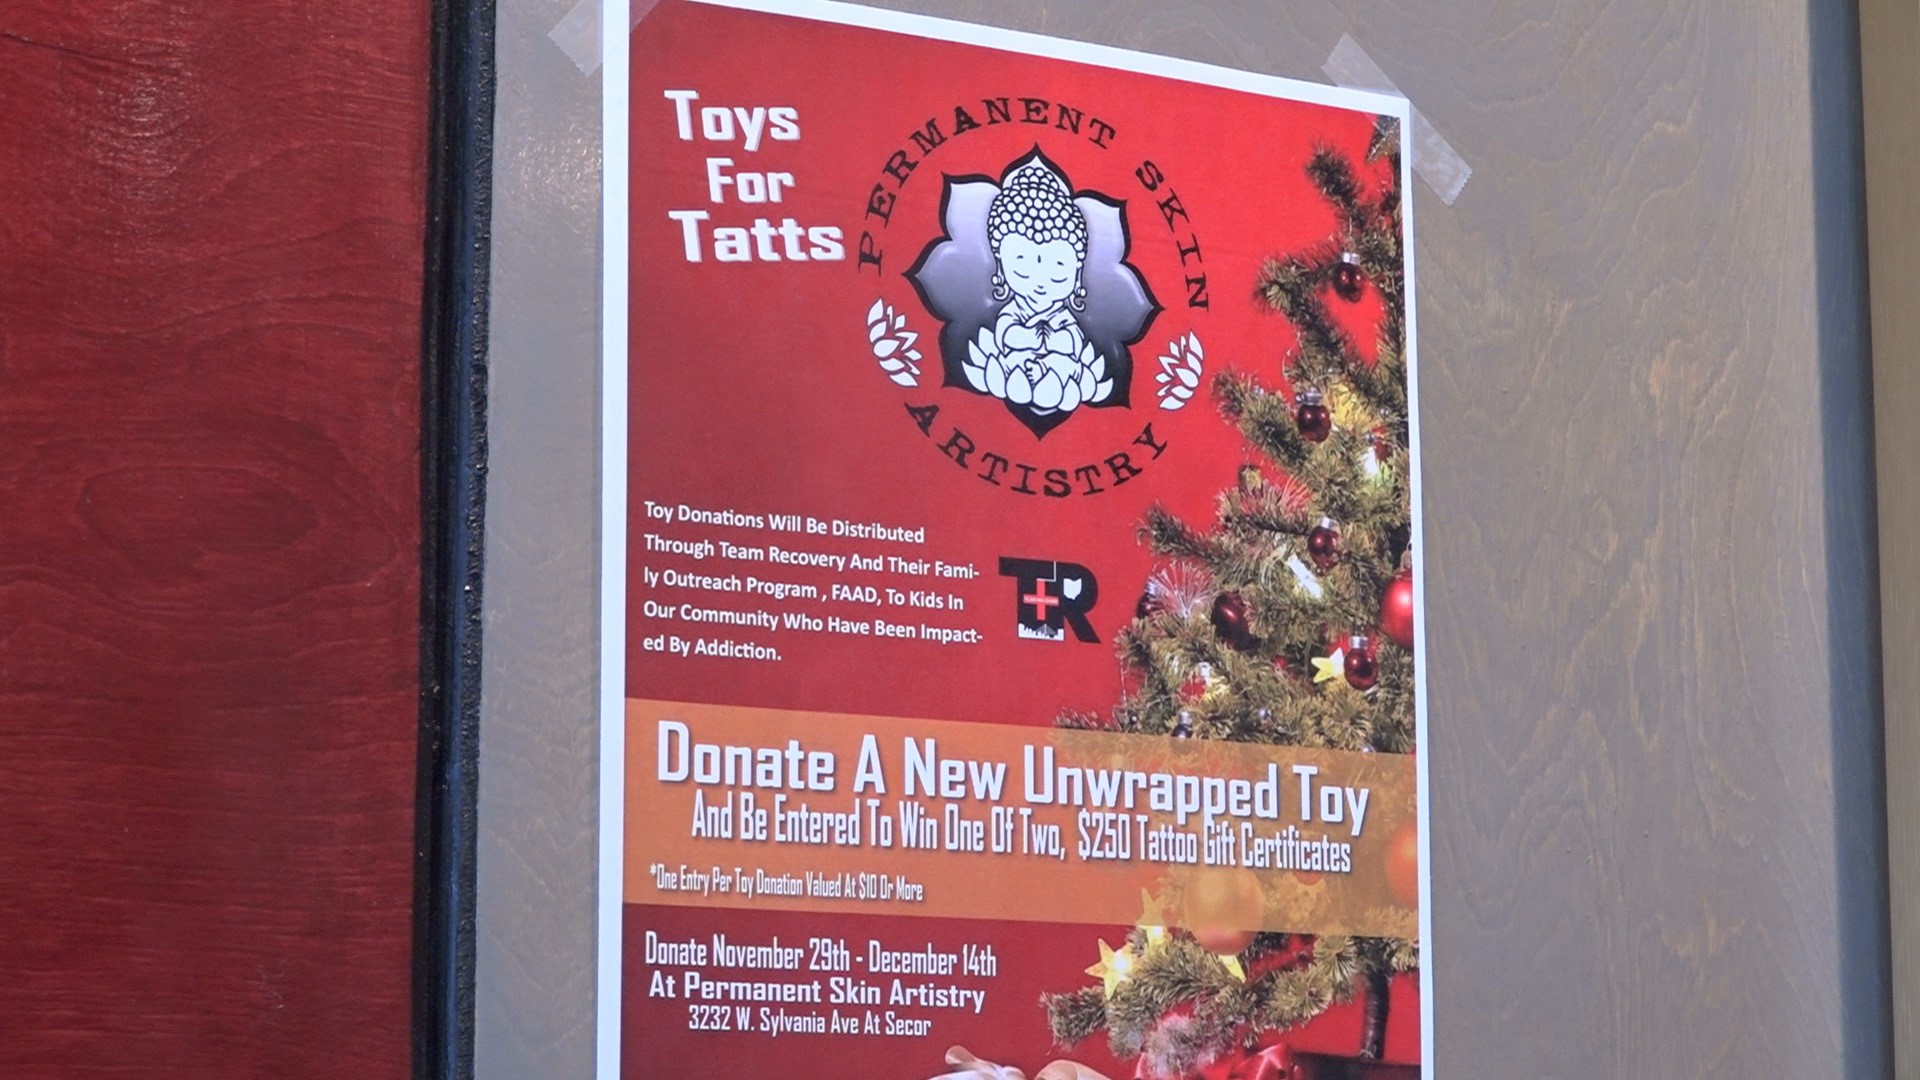 Give a toy ... get a tattoo? That's right, what one local tattoo shop is doing to help needy kids this holiday season.